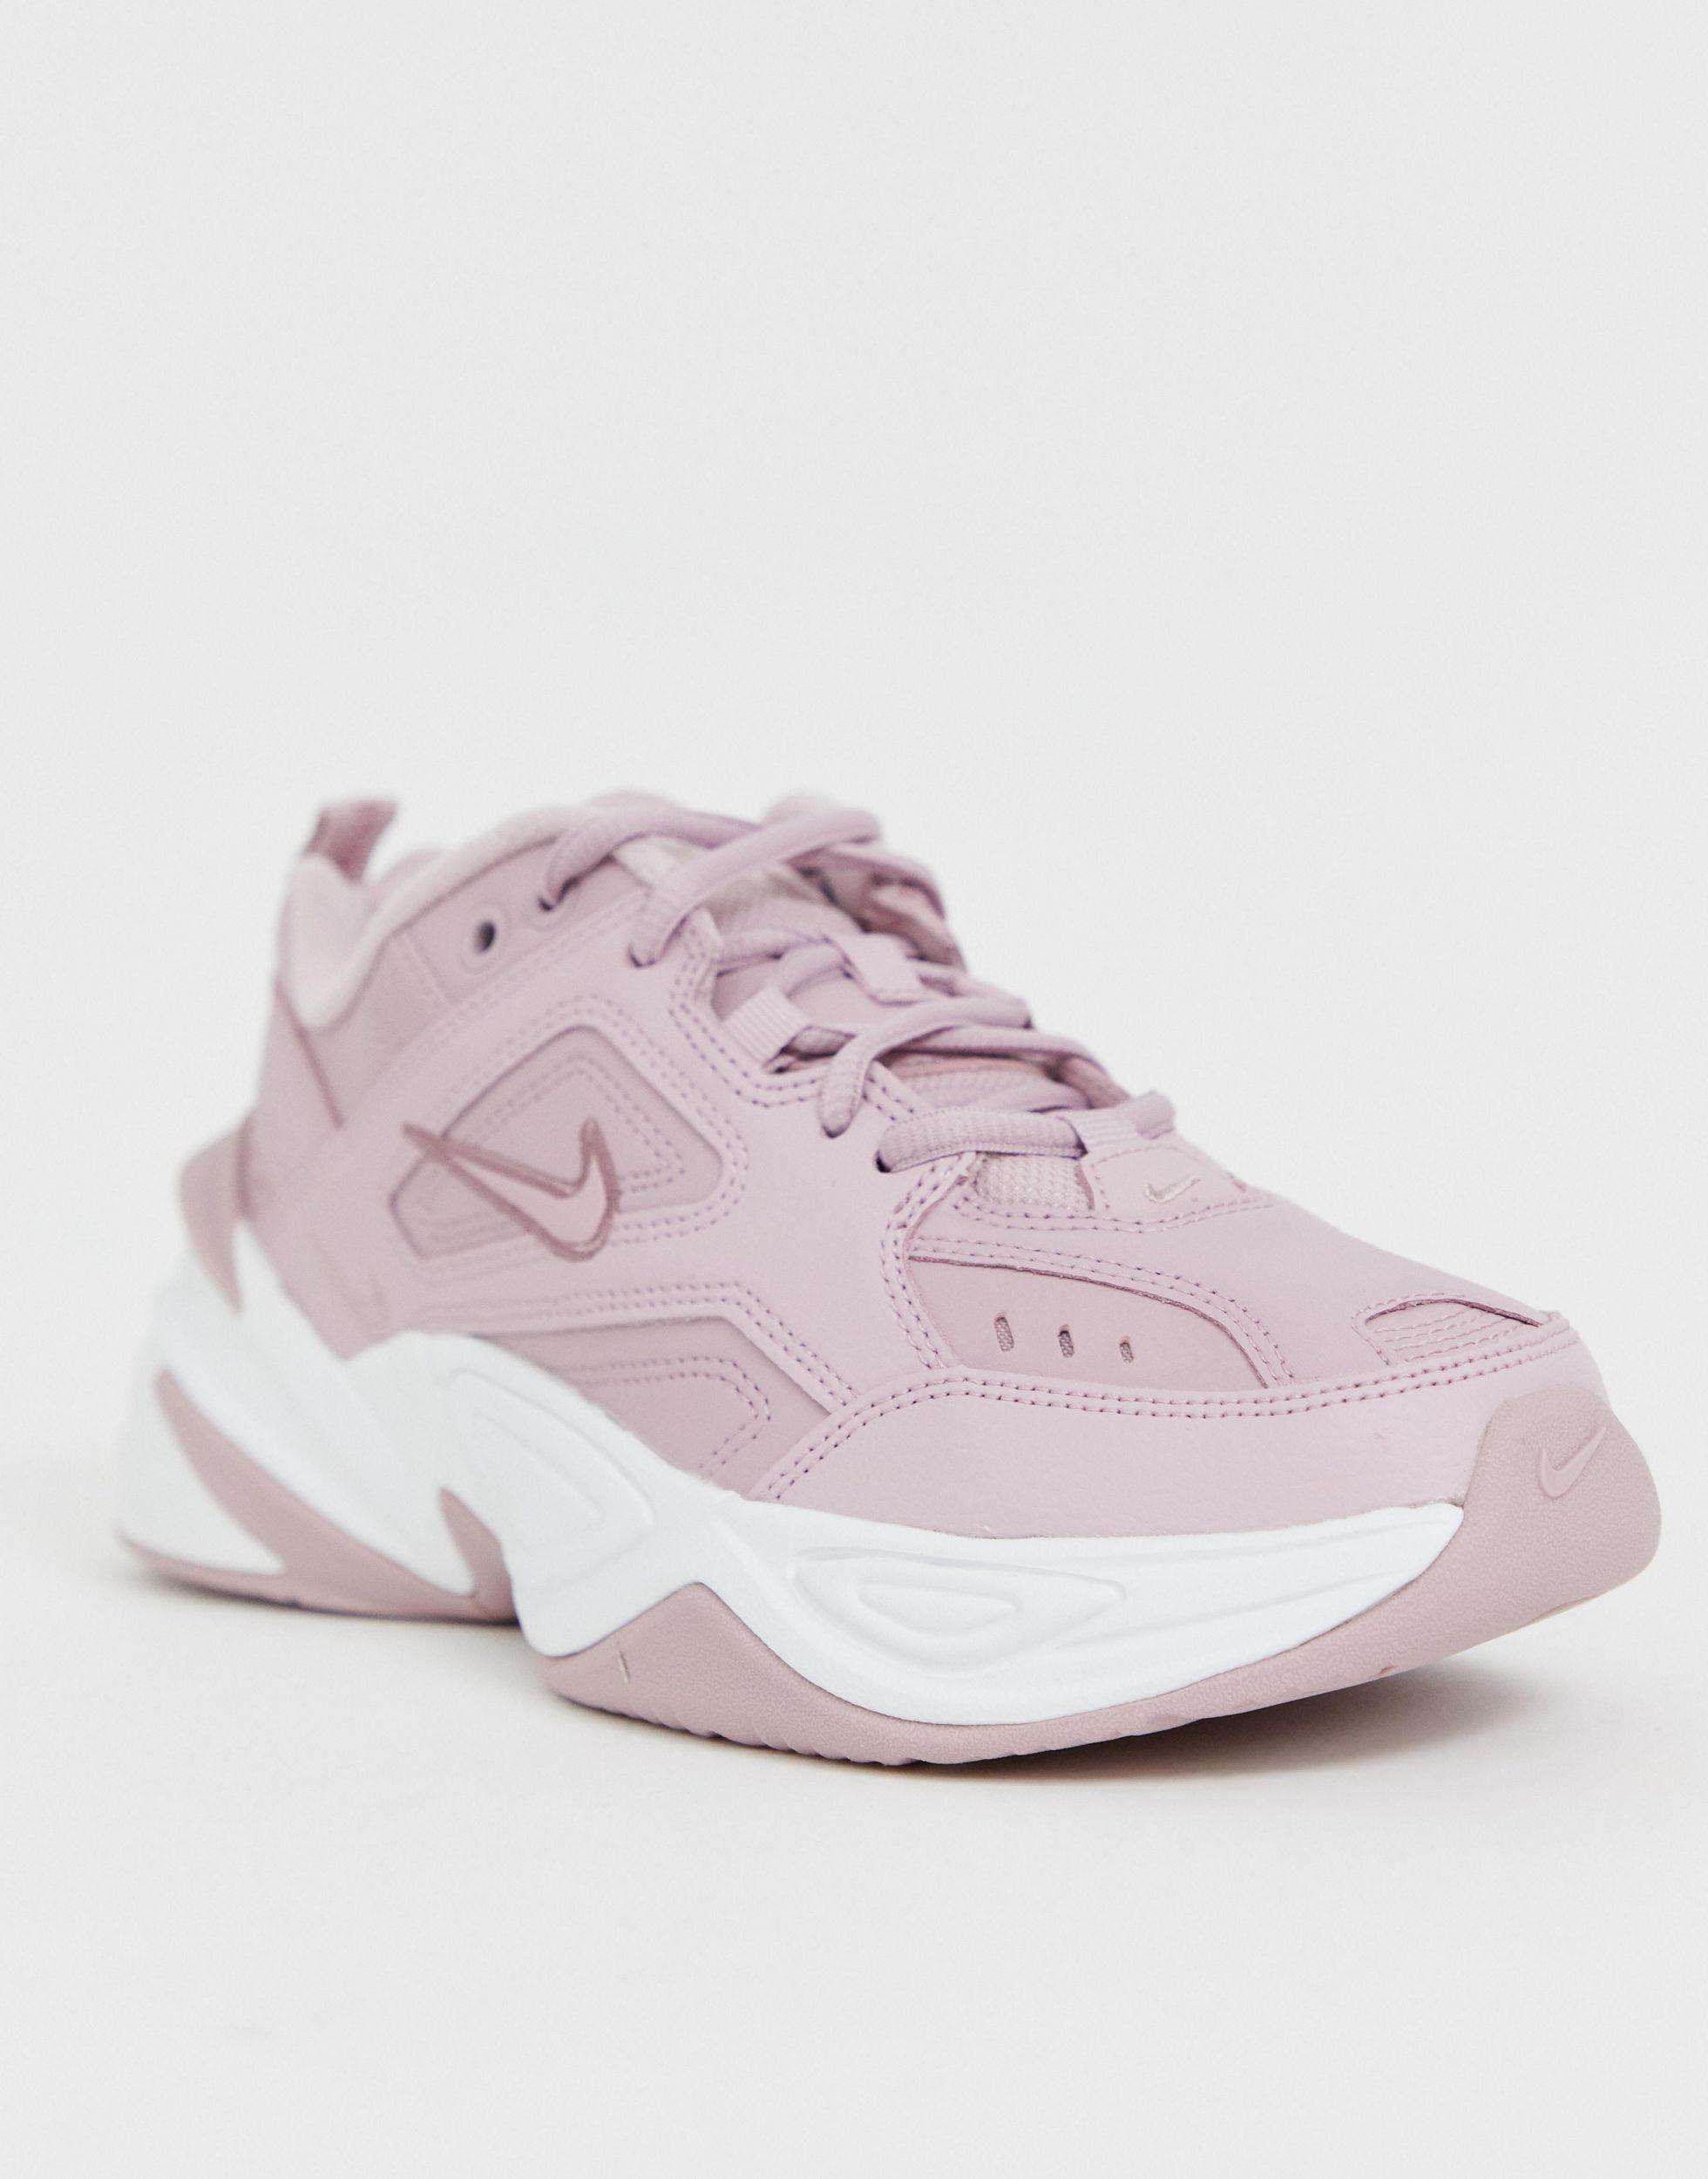 Nike Rubber M2k Tekno Trainers In Pink | Lyst